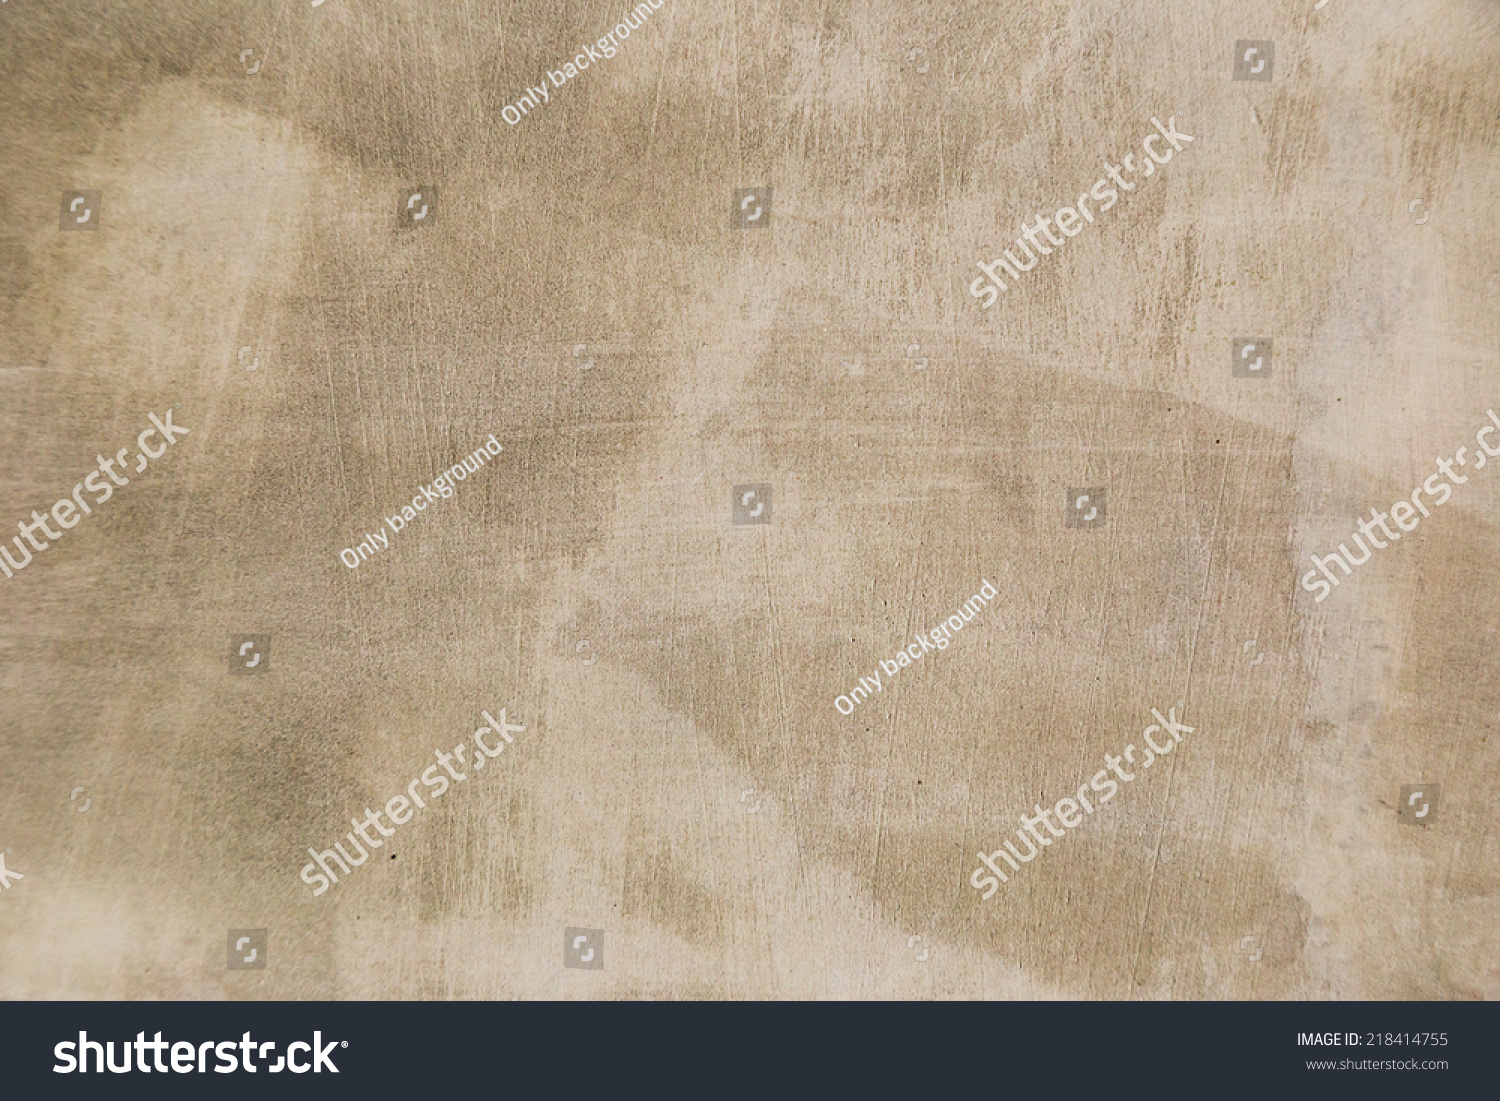 Old wall texture background #218414755